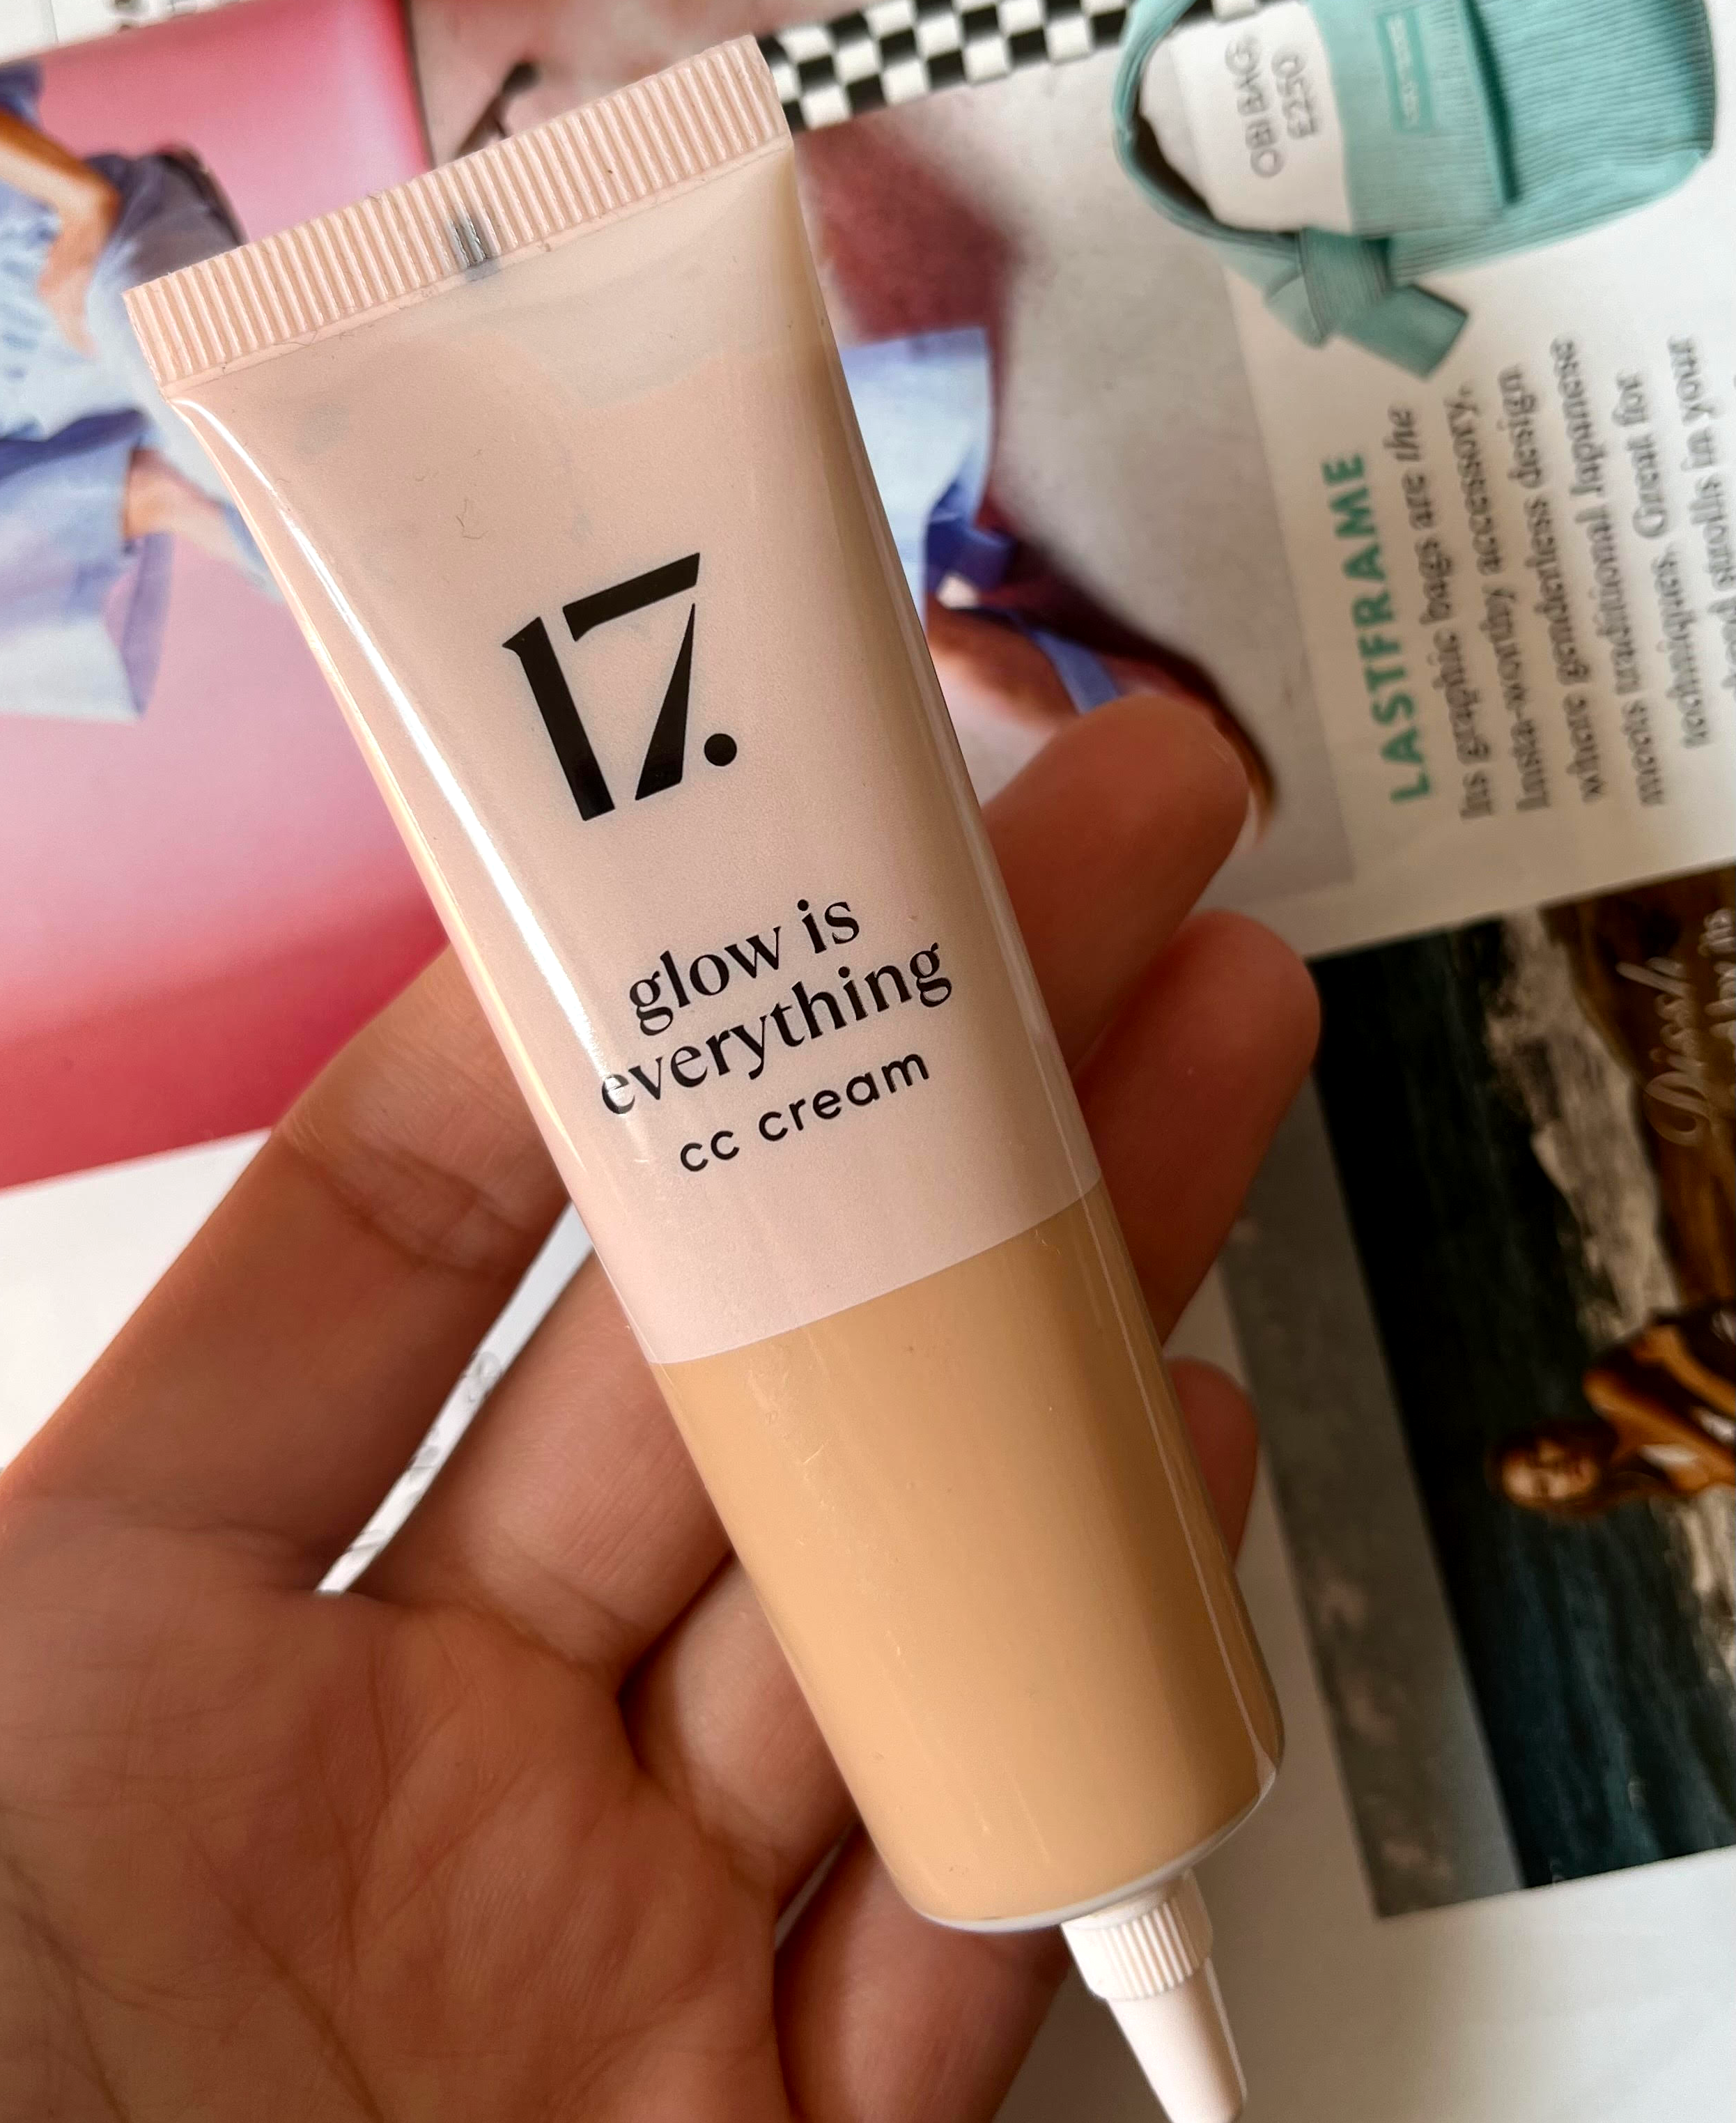 Boots 17 Makeup Glow Is Everything CC Cream review swatches